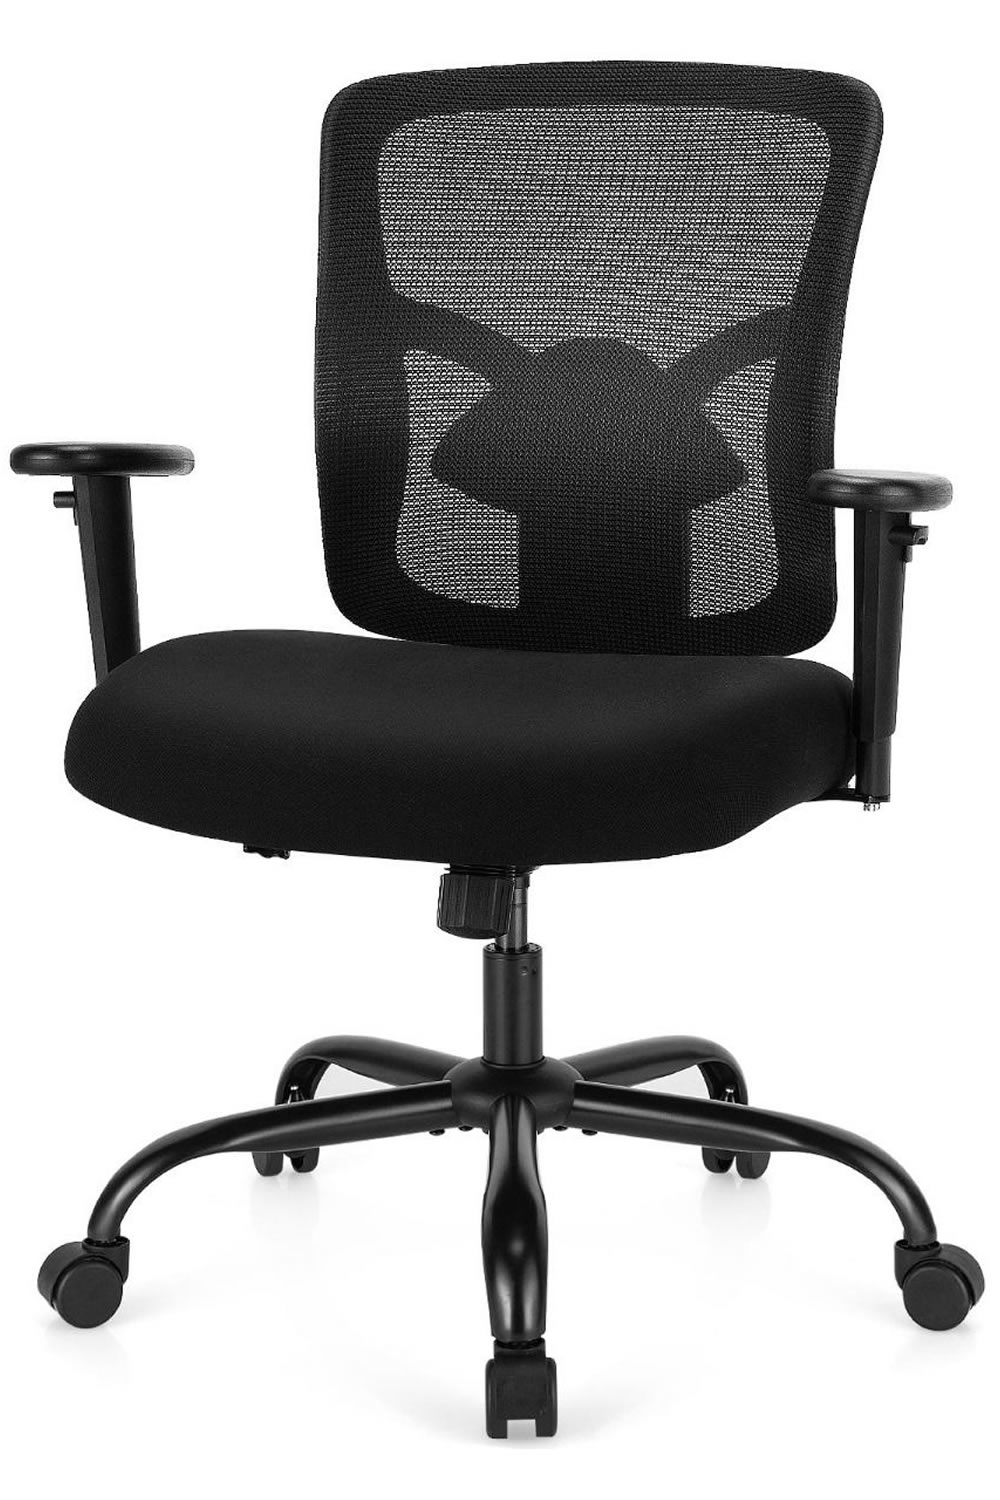 View Rosa Black HeavyDuty Office Chair Wide Fabric Seat Breathable Mesh Backrest Adjustable Lumbar Height Adjustable Arms Weight Tested to 180kg information